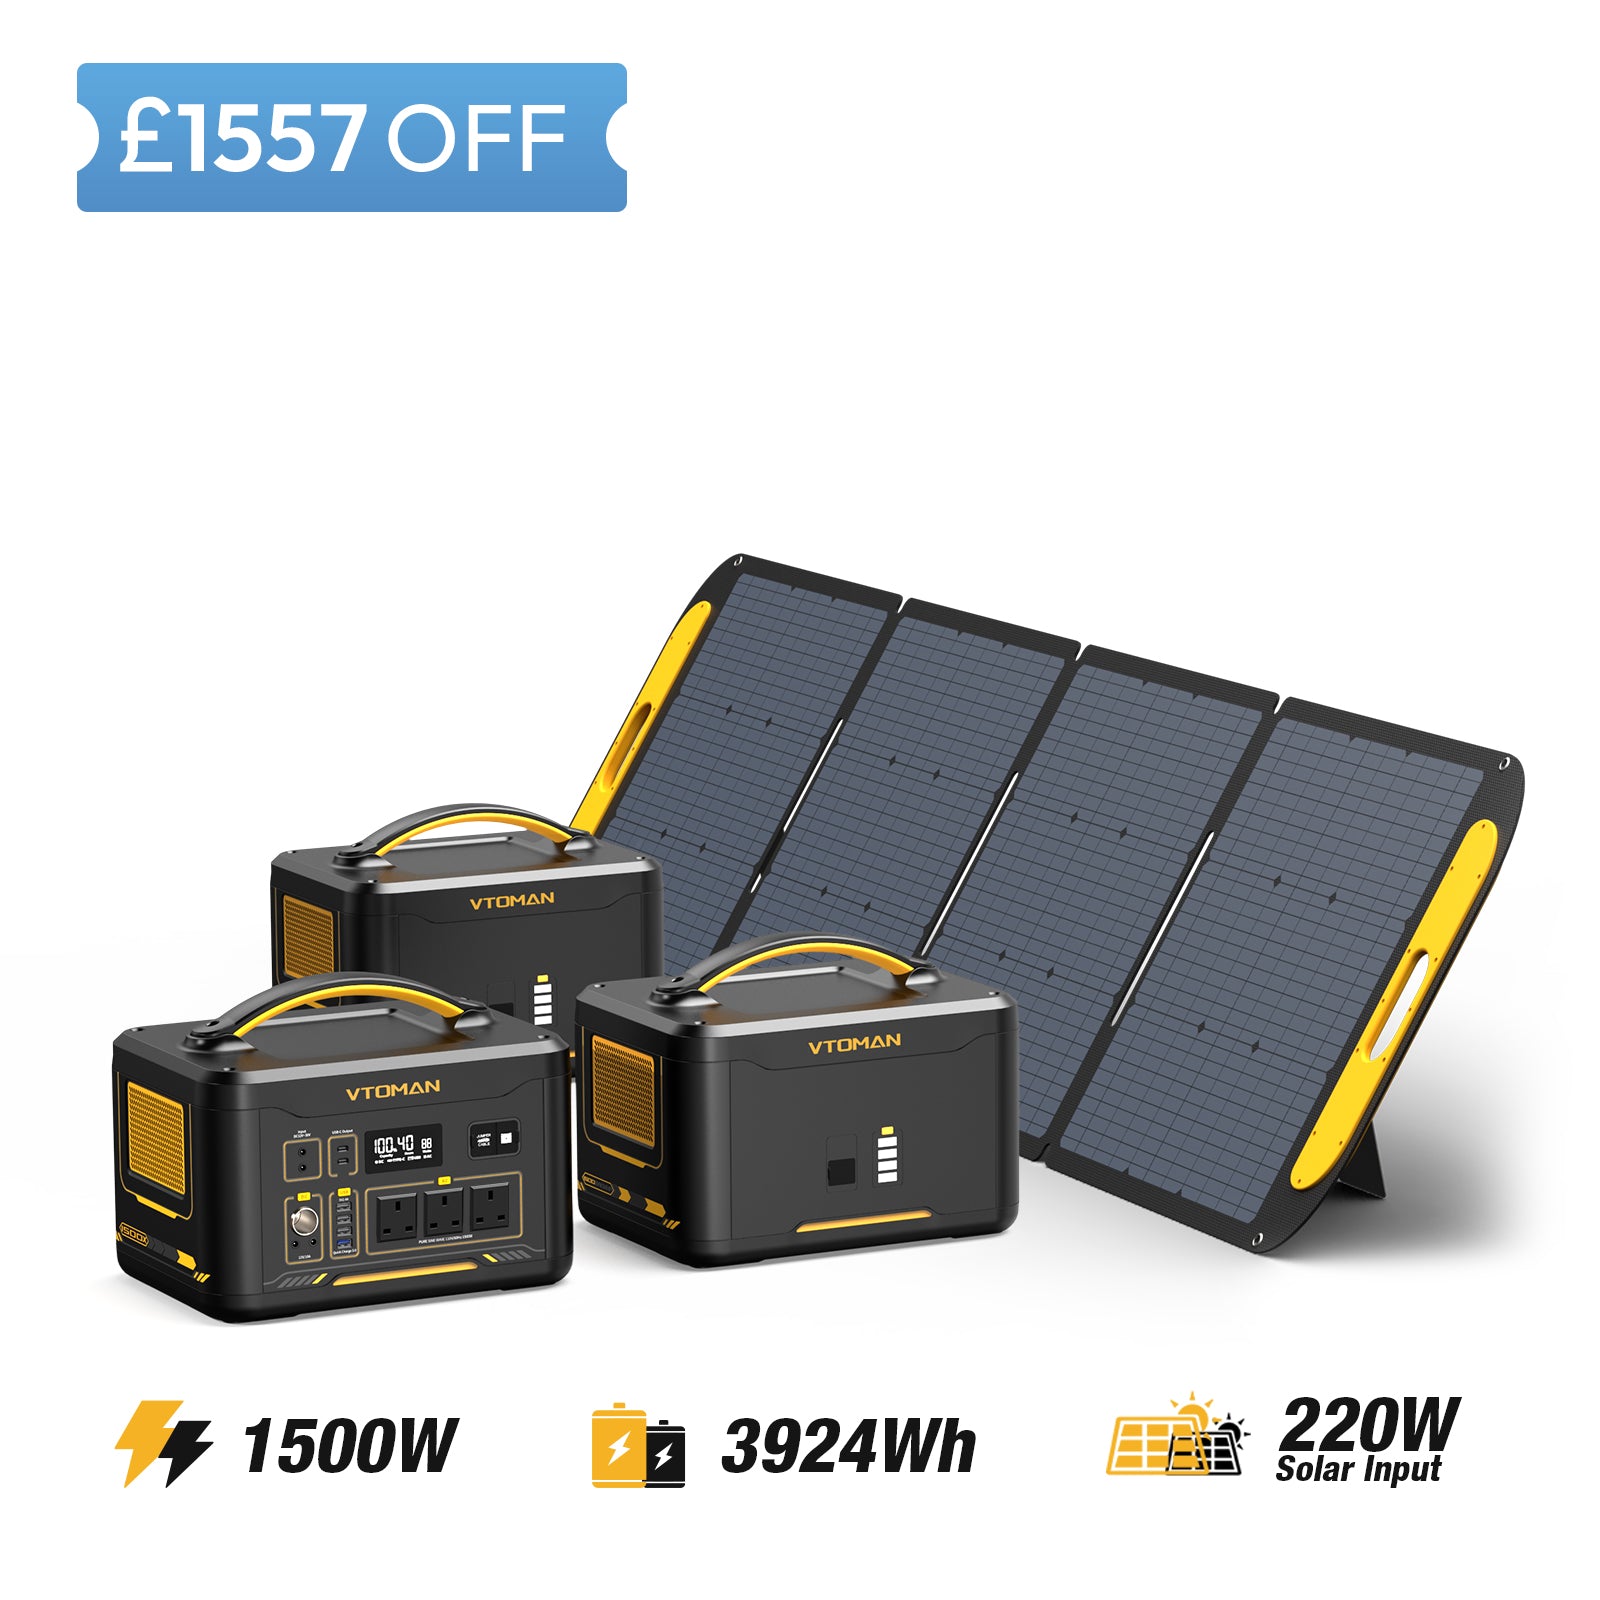 Jump 1500X and 2-1548wh extra battery and 220W solar panel save £1557 in summer sale